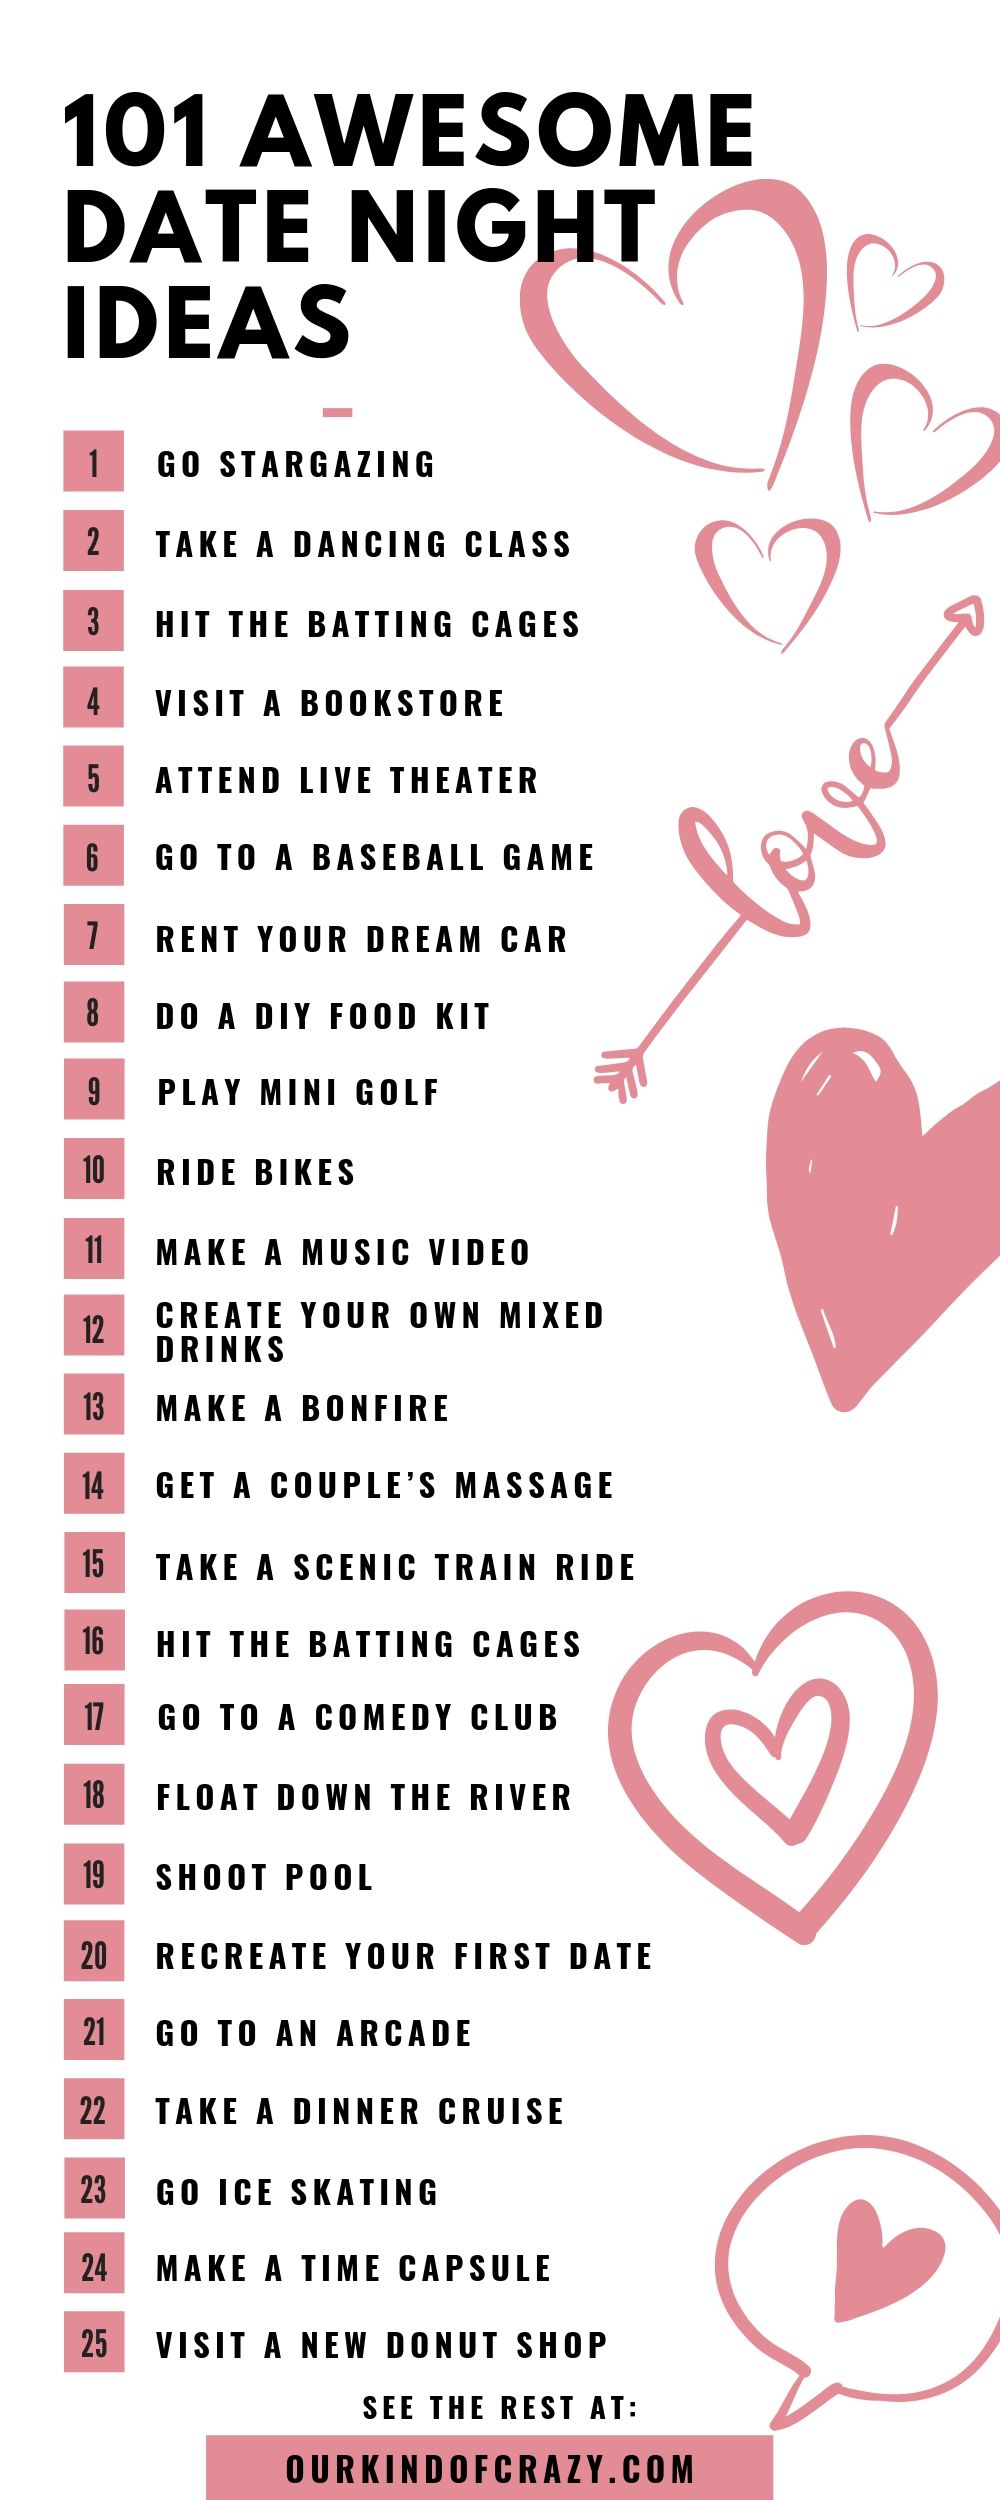 "101 awesome date night ideas" with list of 25 ideas.